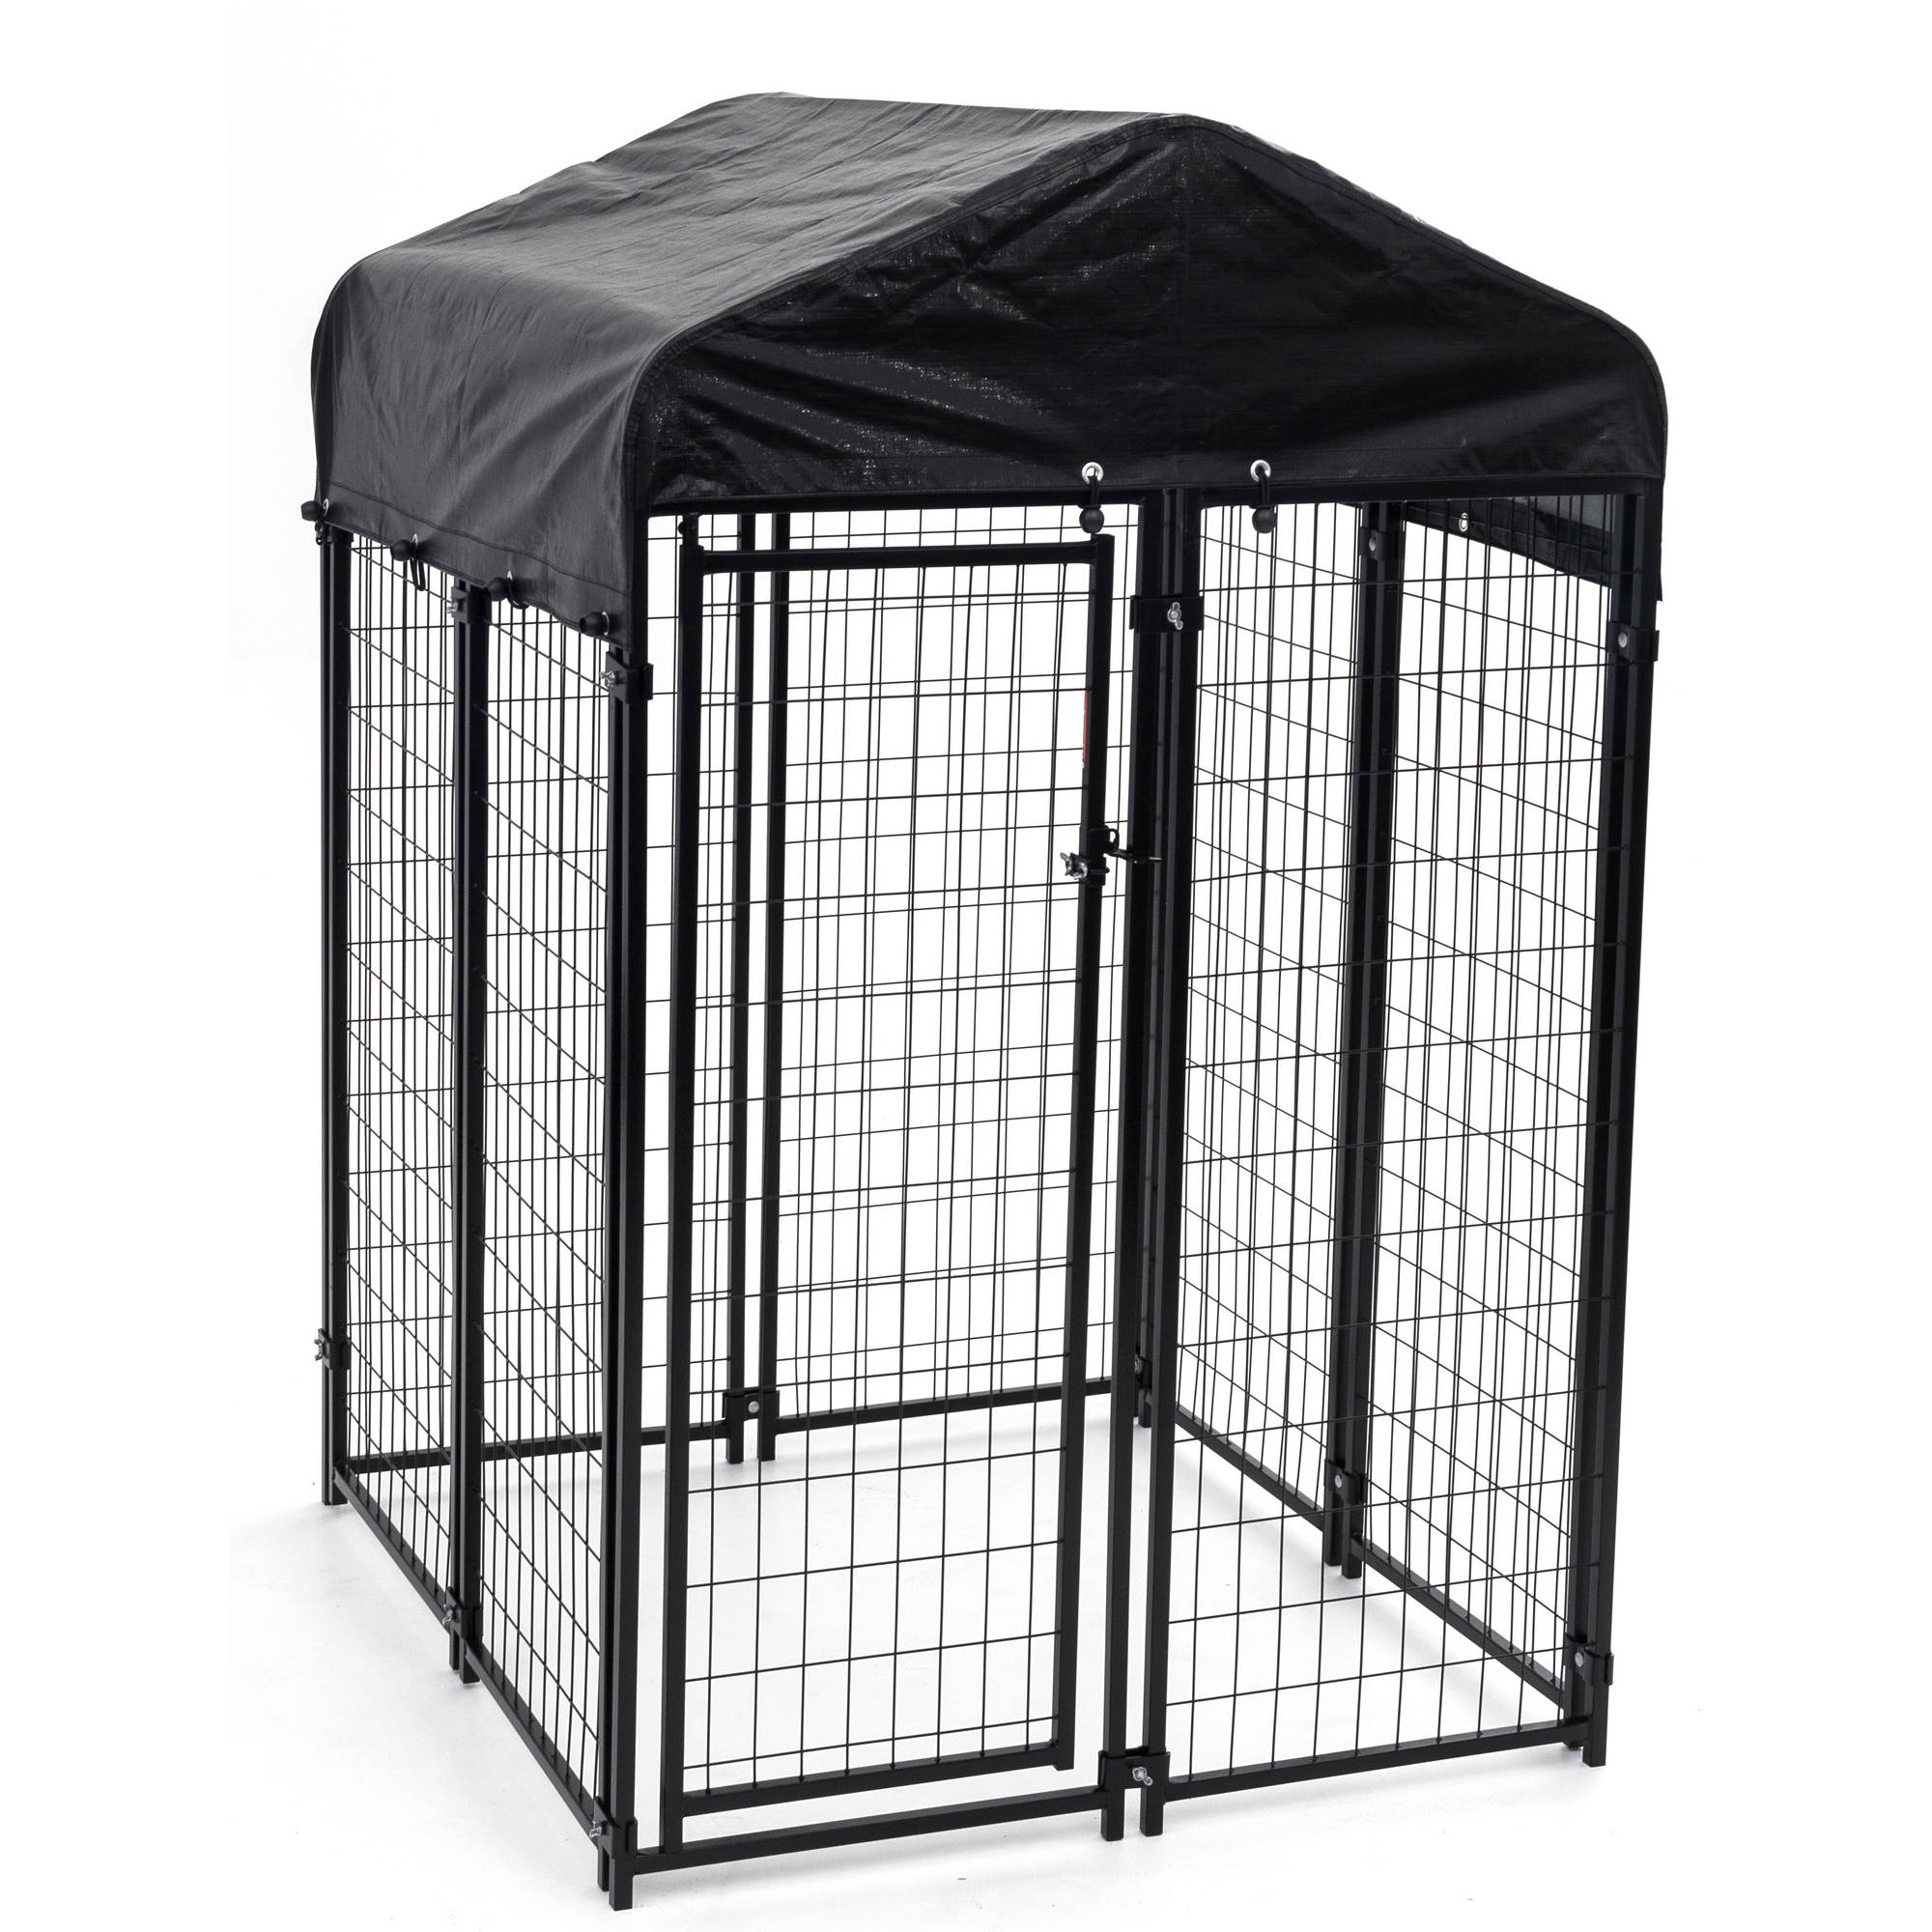 Lucky Dog Uptown Welded Wire Dog Kennel w/ Cover, 6'H x 4'W x 4'L - image 1 of 5